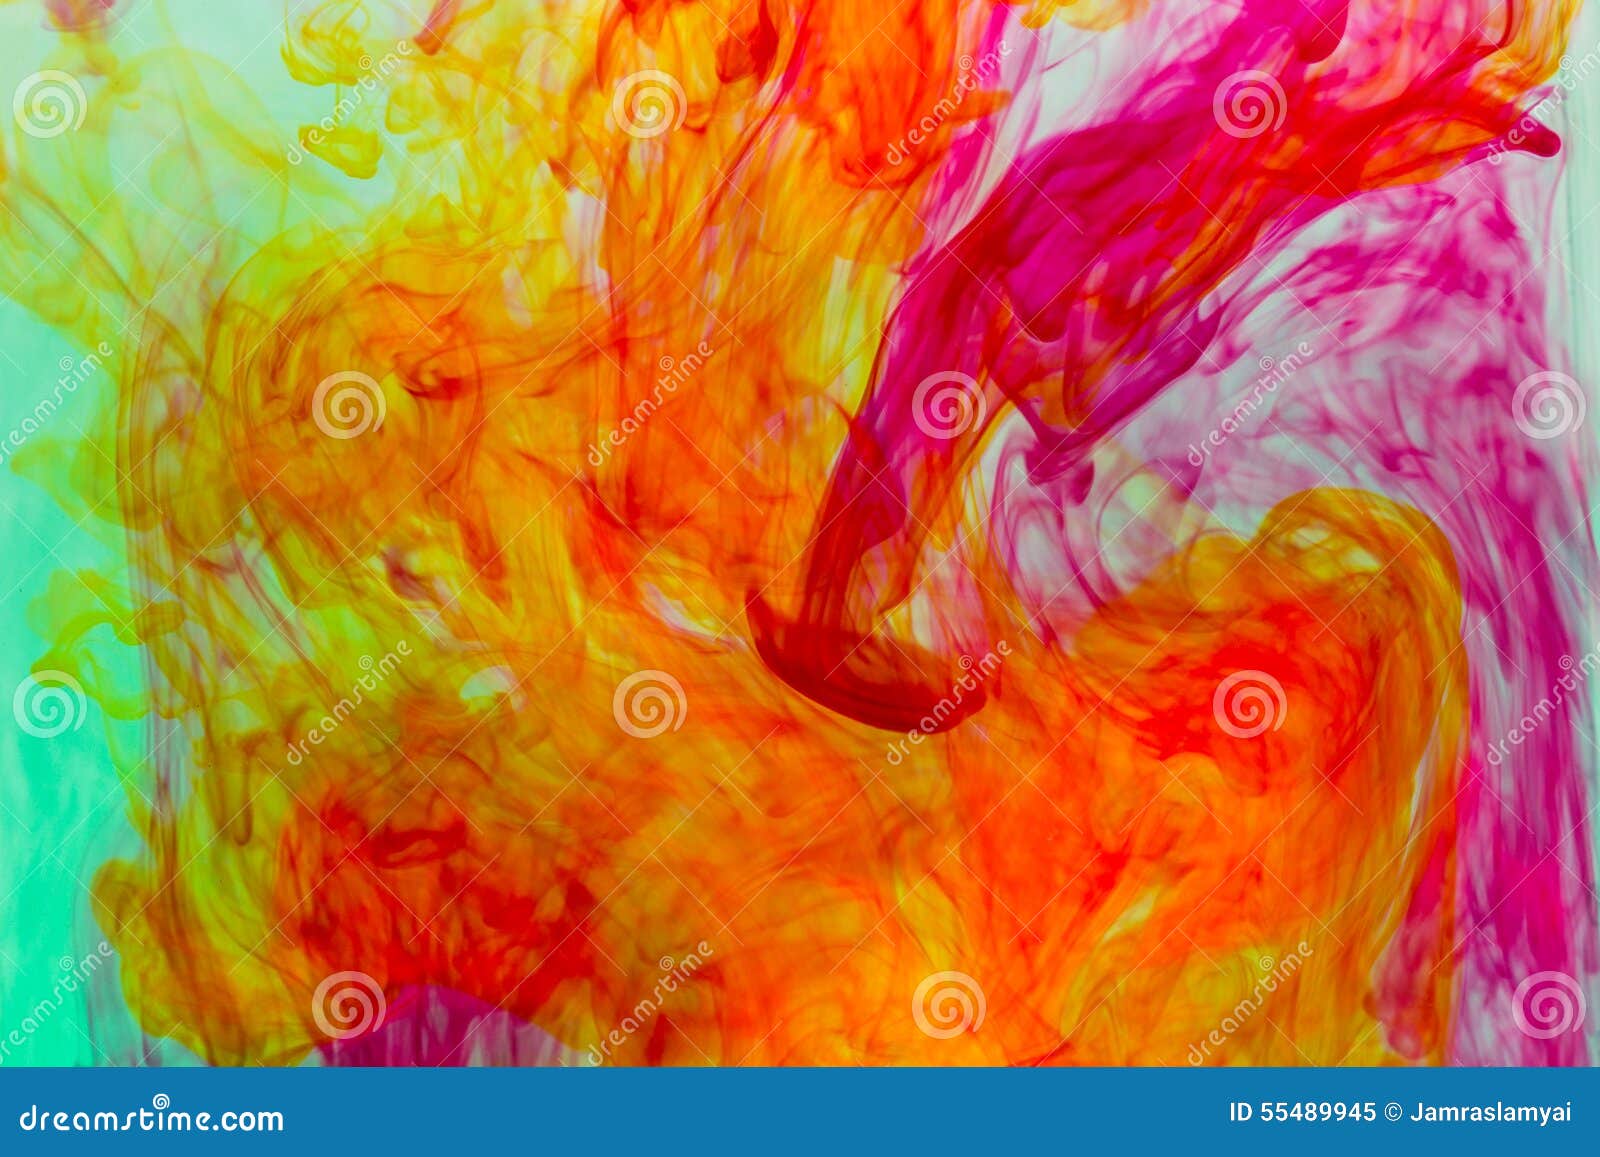 The Color Spread on the Water Stock Image - Image of imagination, colors:  55489945